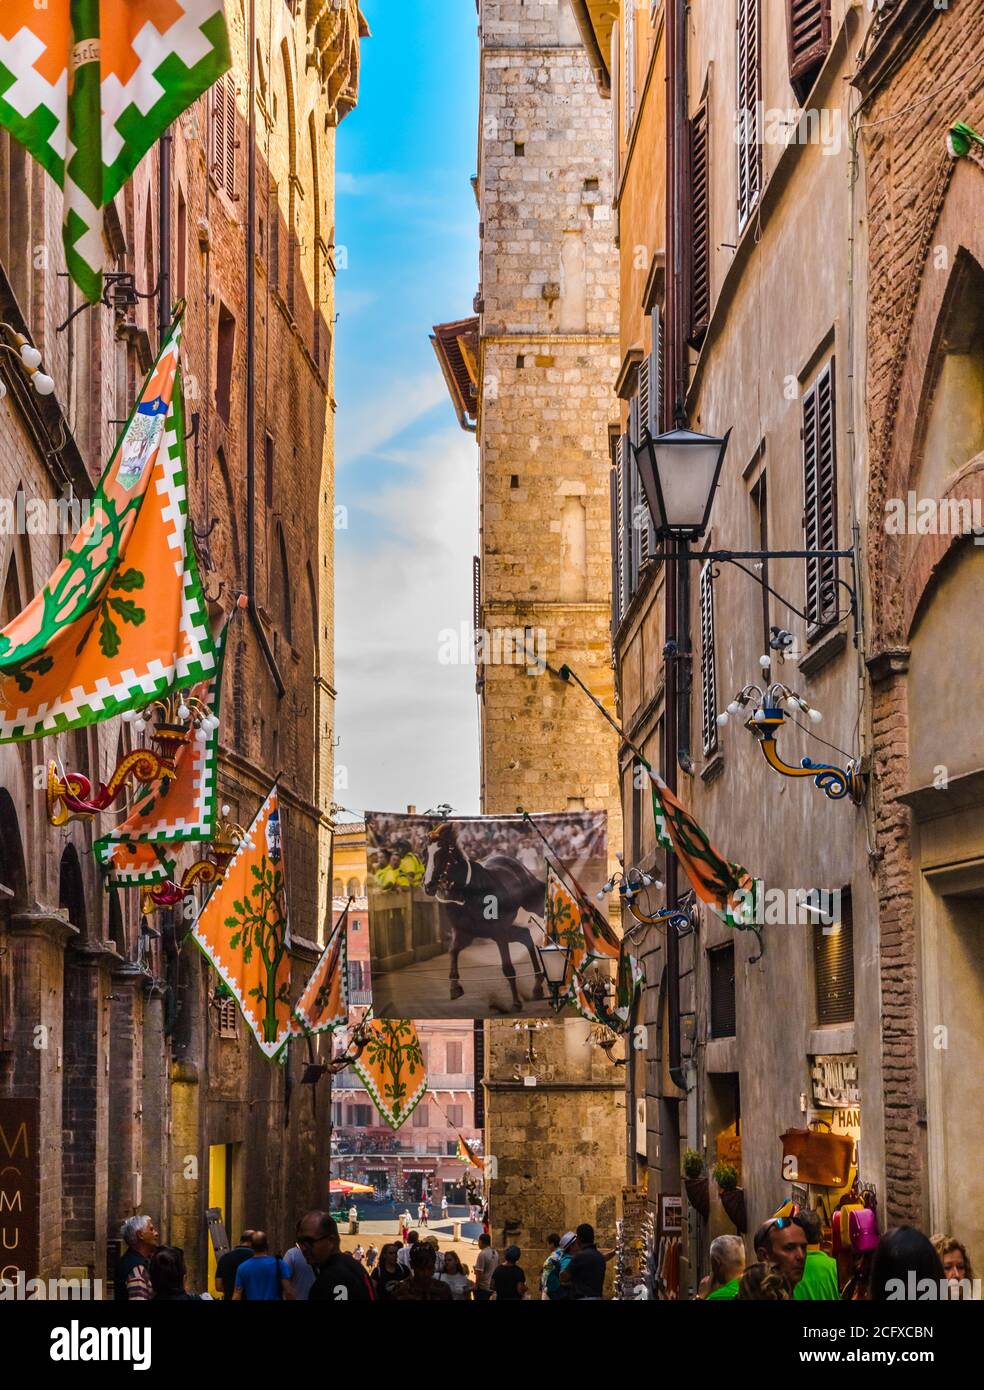 Great view of the popular Via dei Pellegrini towards the square Piazza del Campo in Siena. The street is decorated with flags from Selva, the Forest... Stock Photo